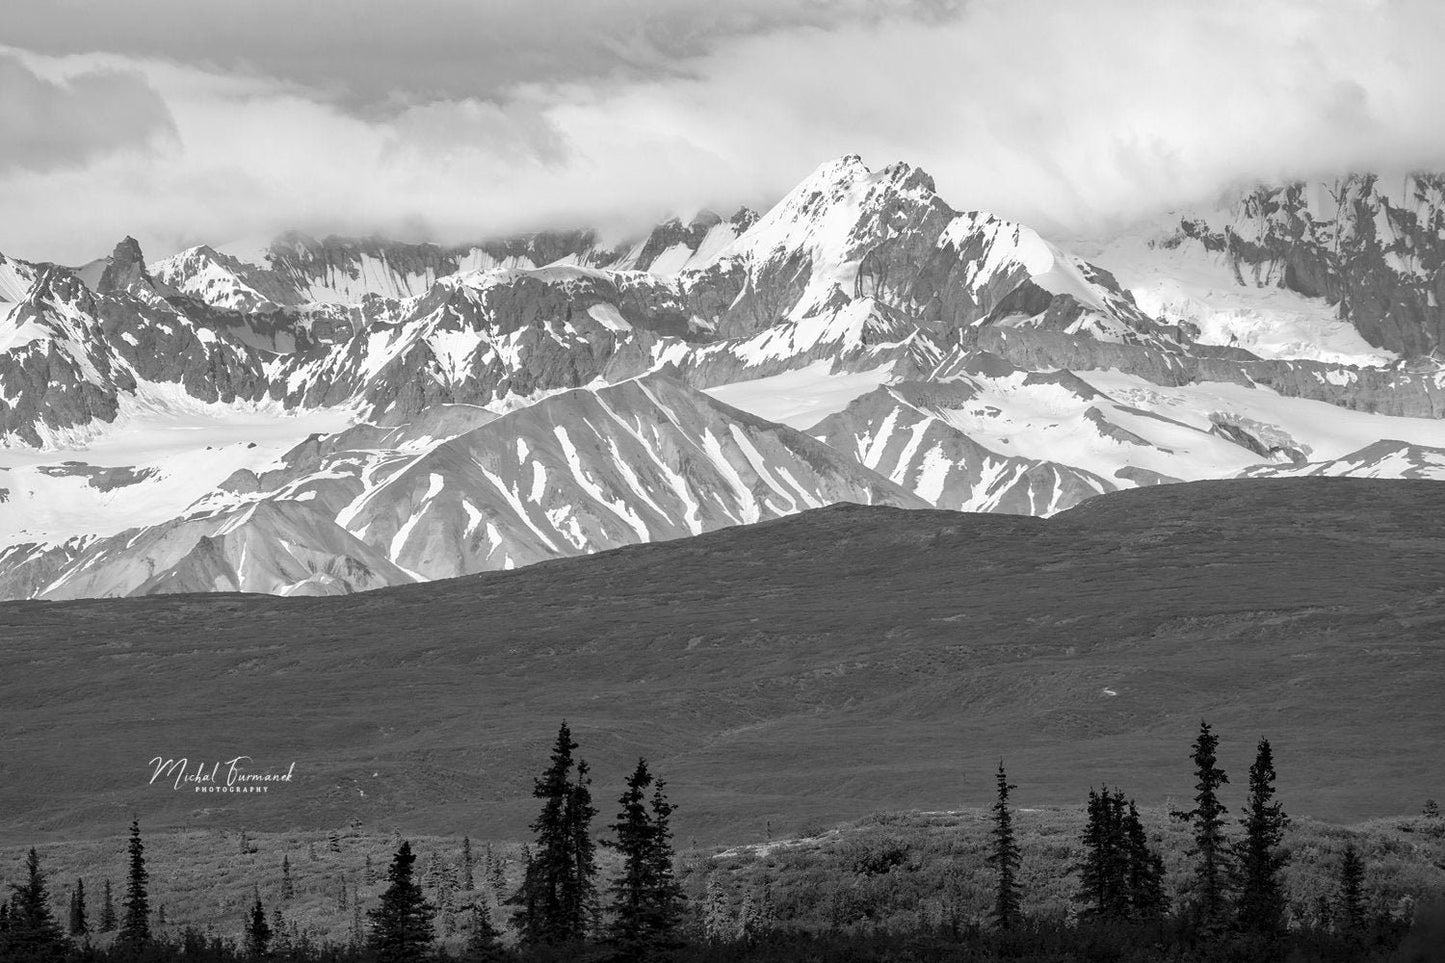 Alaska photo print, Denali Highway, black and white mountain photography, wall art decor, large paper or canvas picture, 5x7 to 40x60"